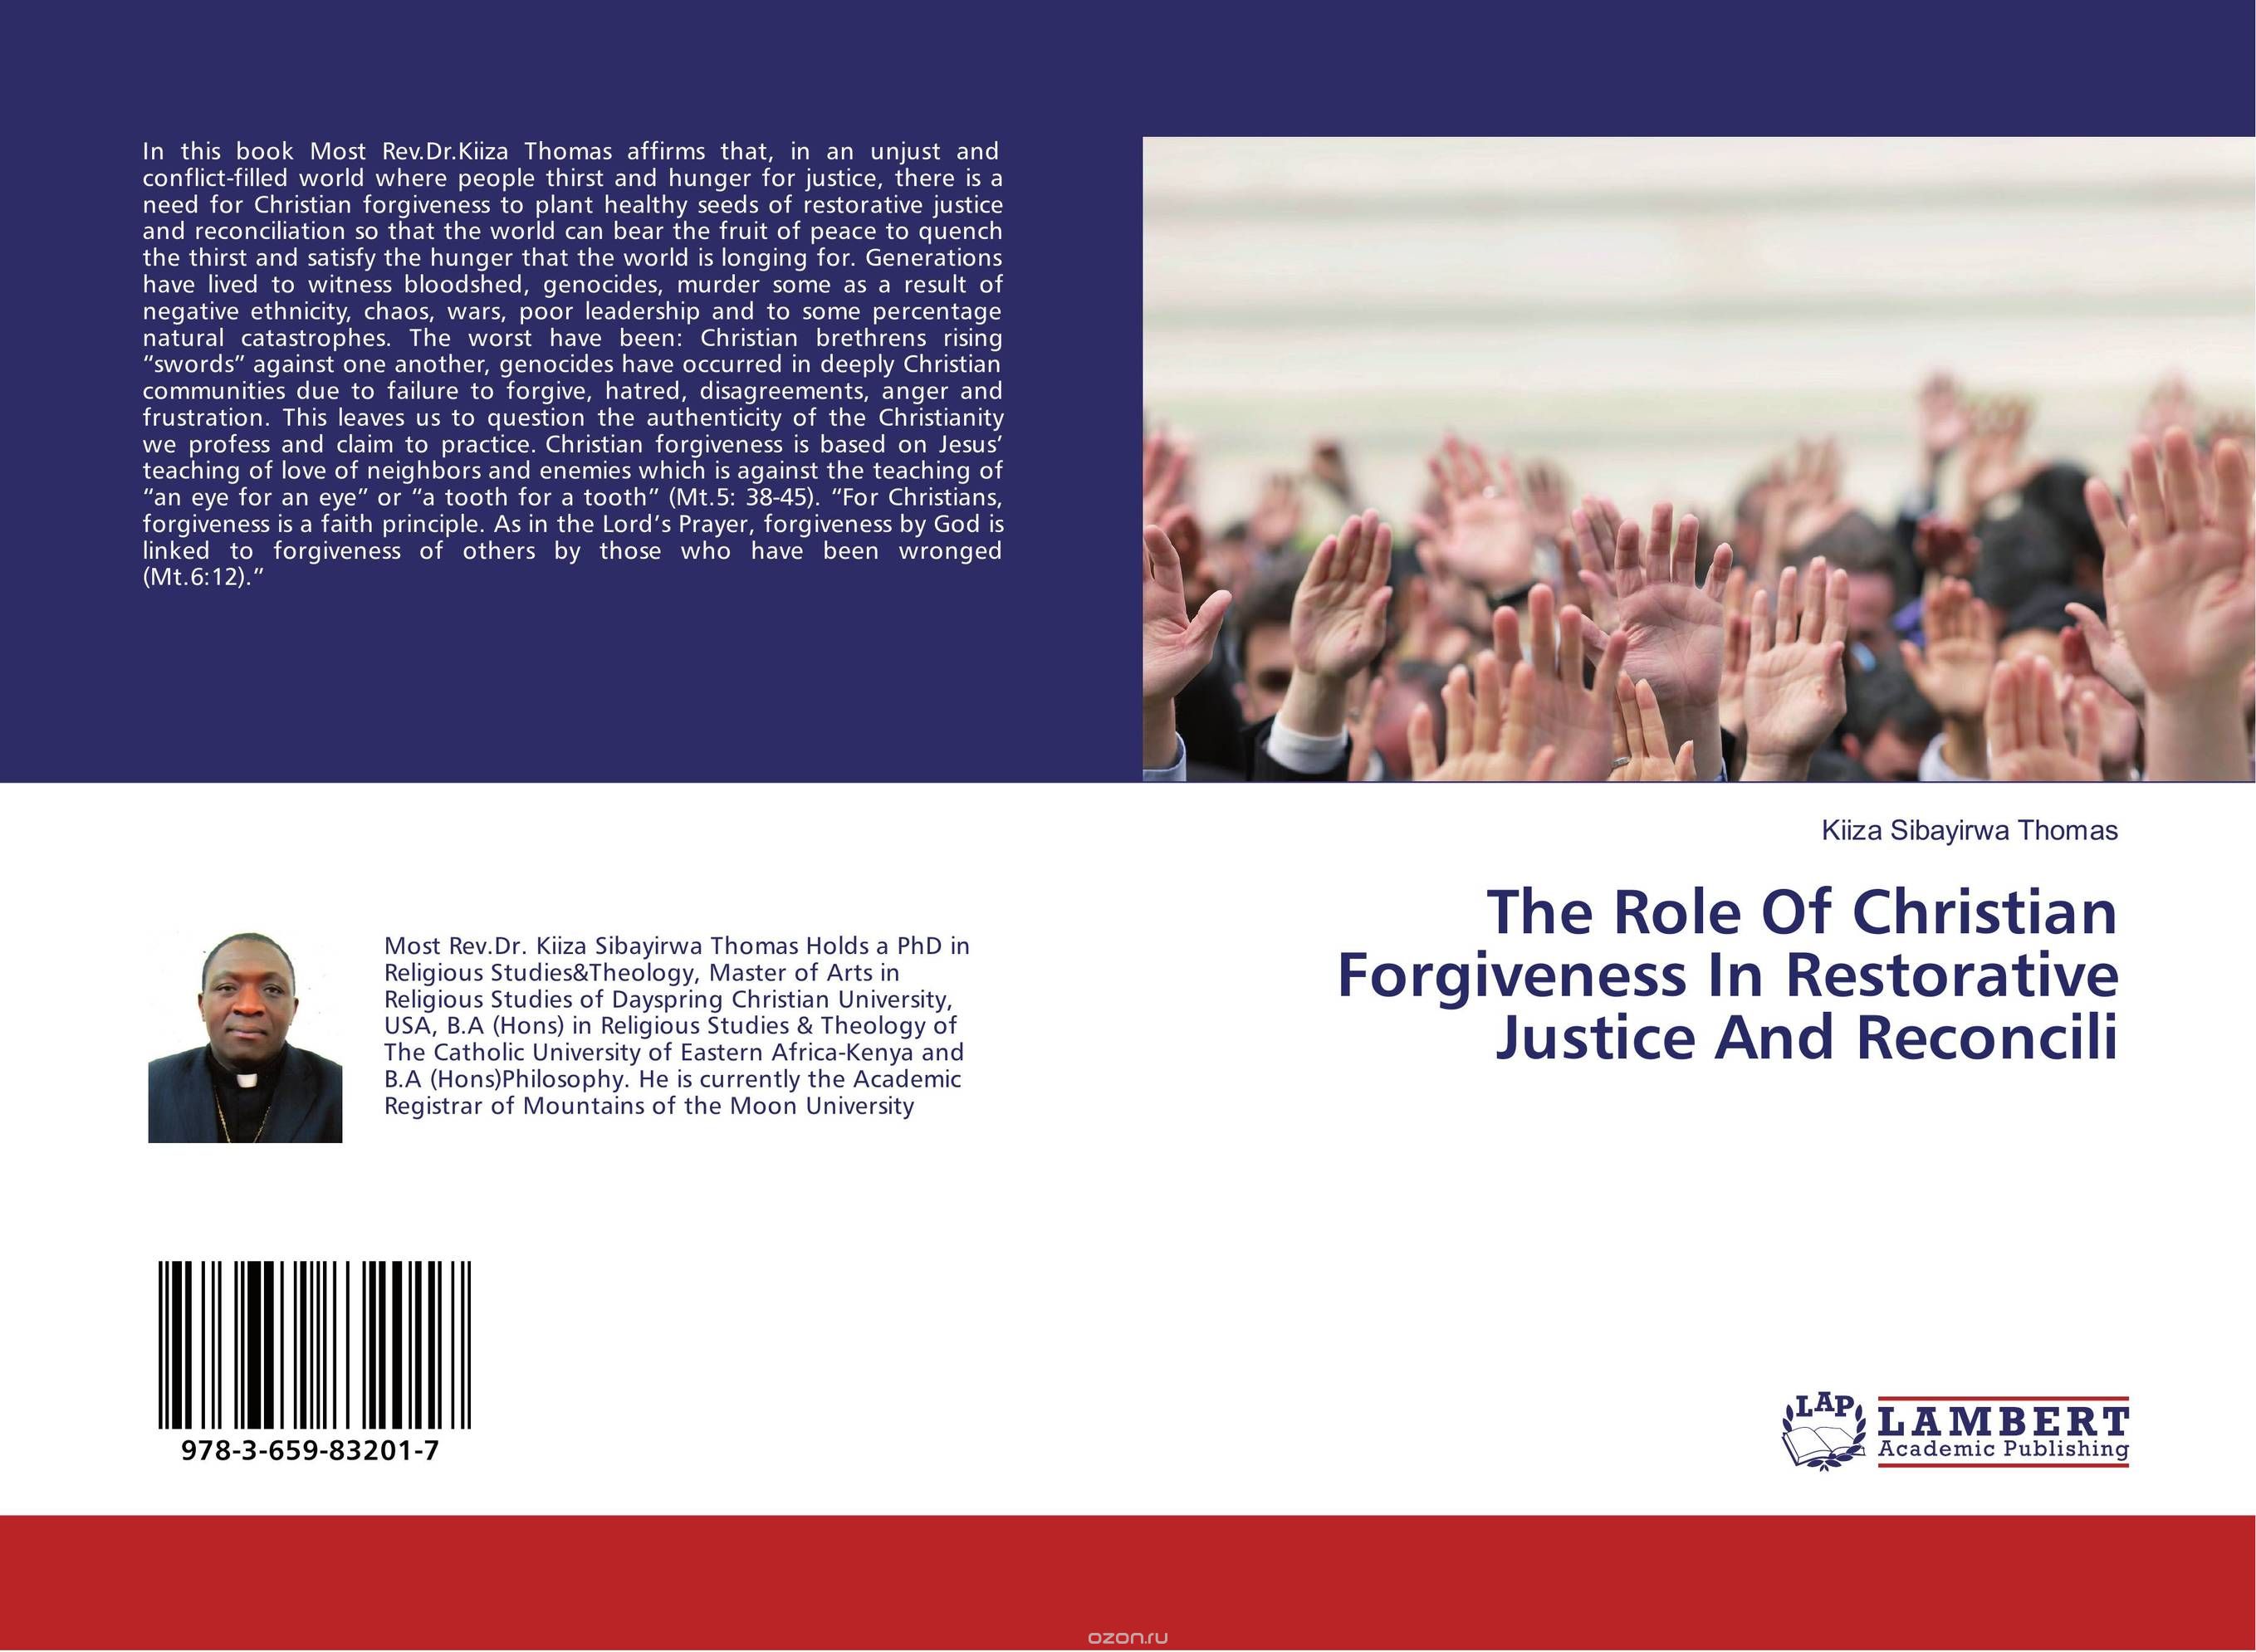 Скачать книгу "The Role Of Christian Forgiveness In Restorative Justice And Reconcili"